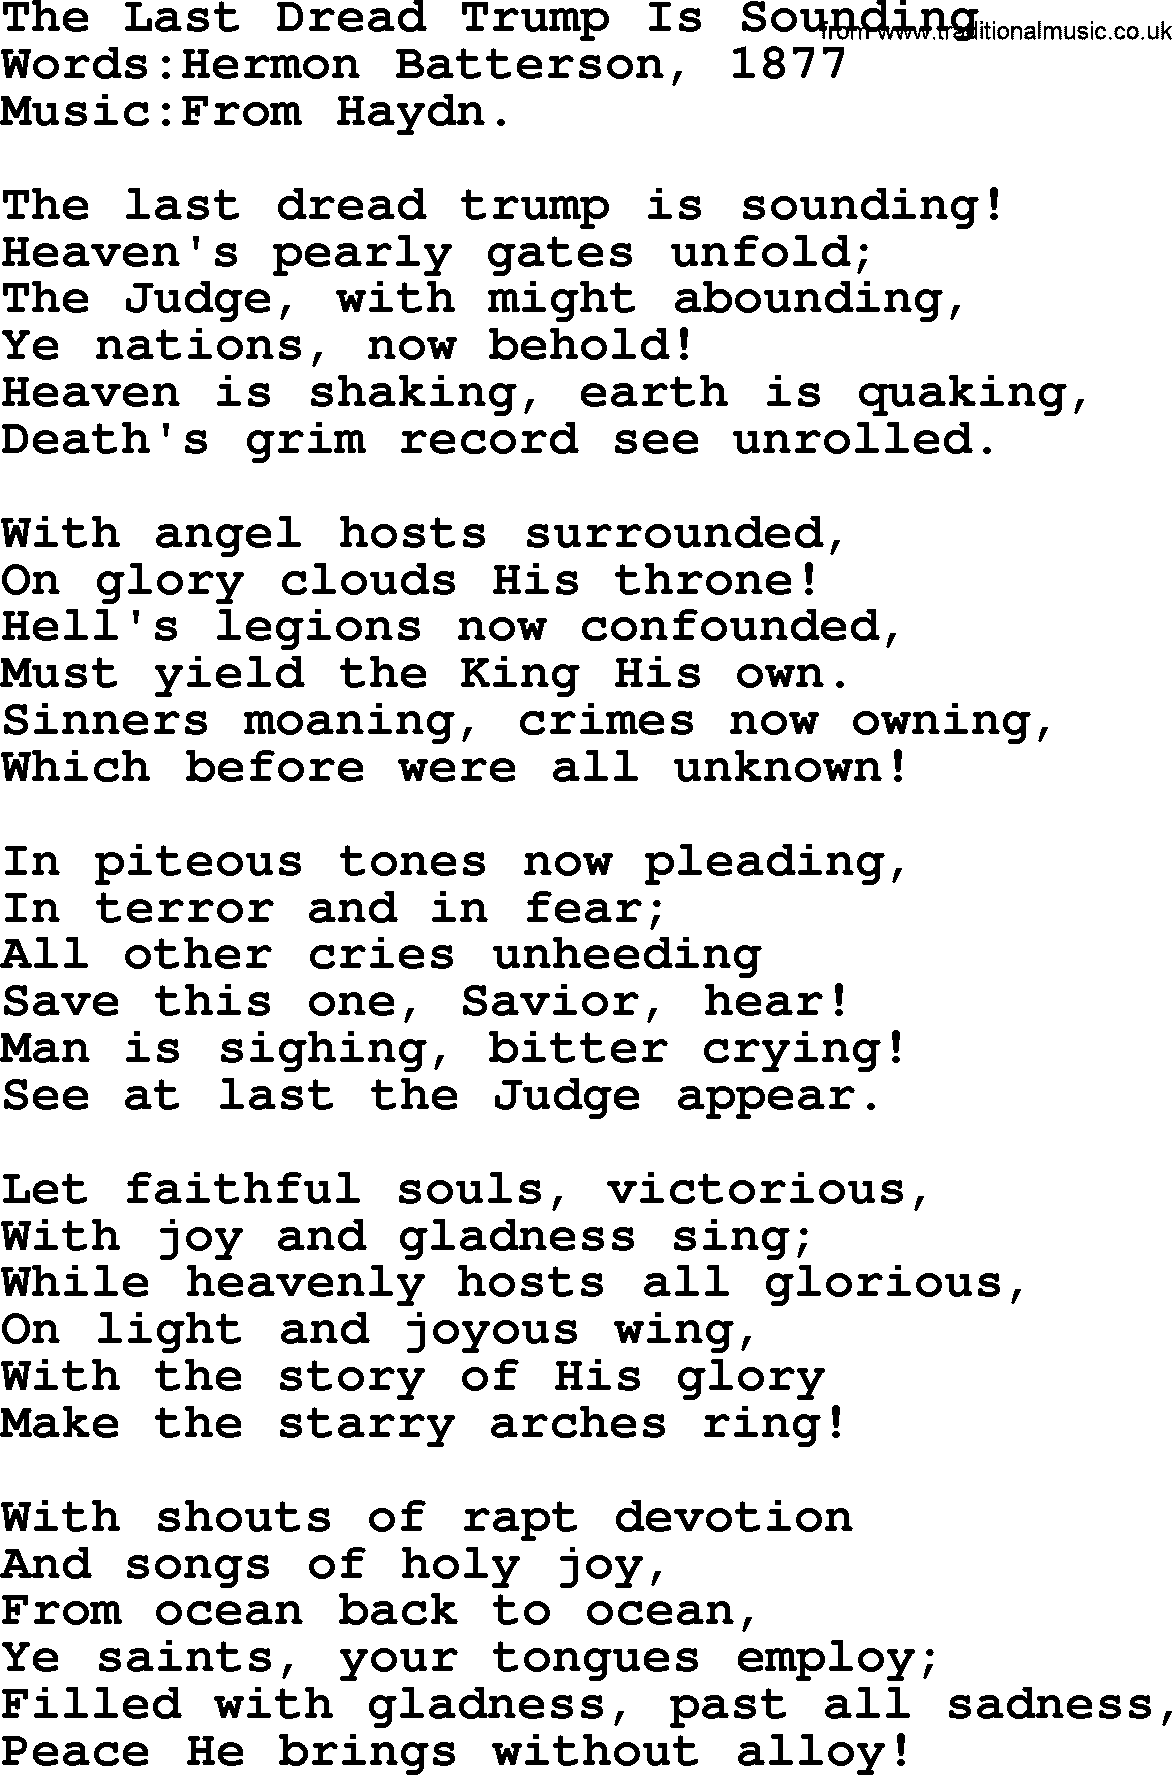 Christian hymns and songs about Jesus' Return(The Second Coming): The Last Dread Trump Is Sounding, lyrics with PDF